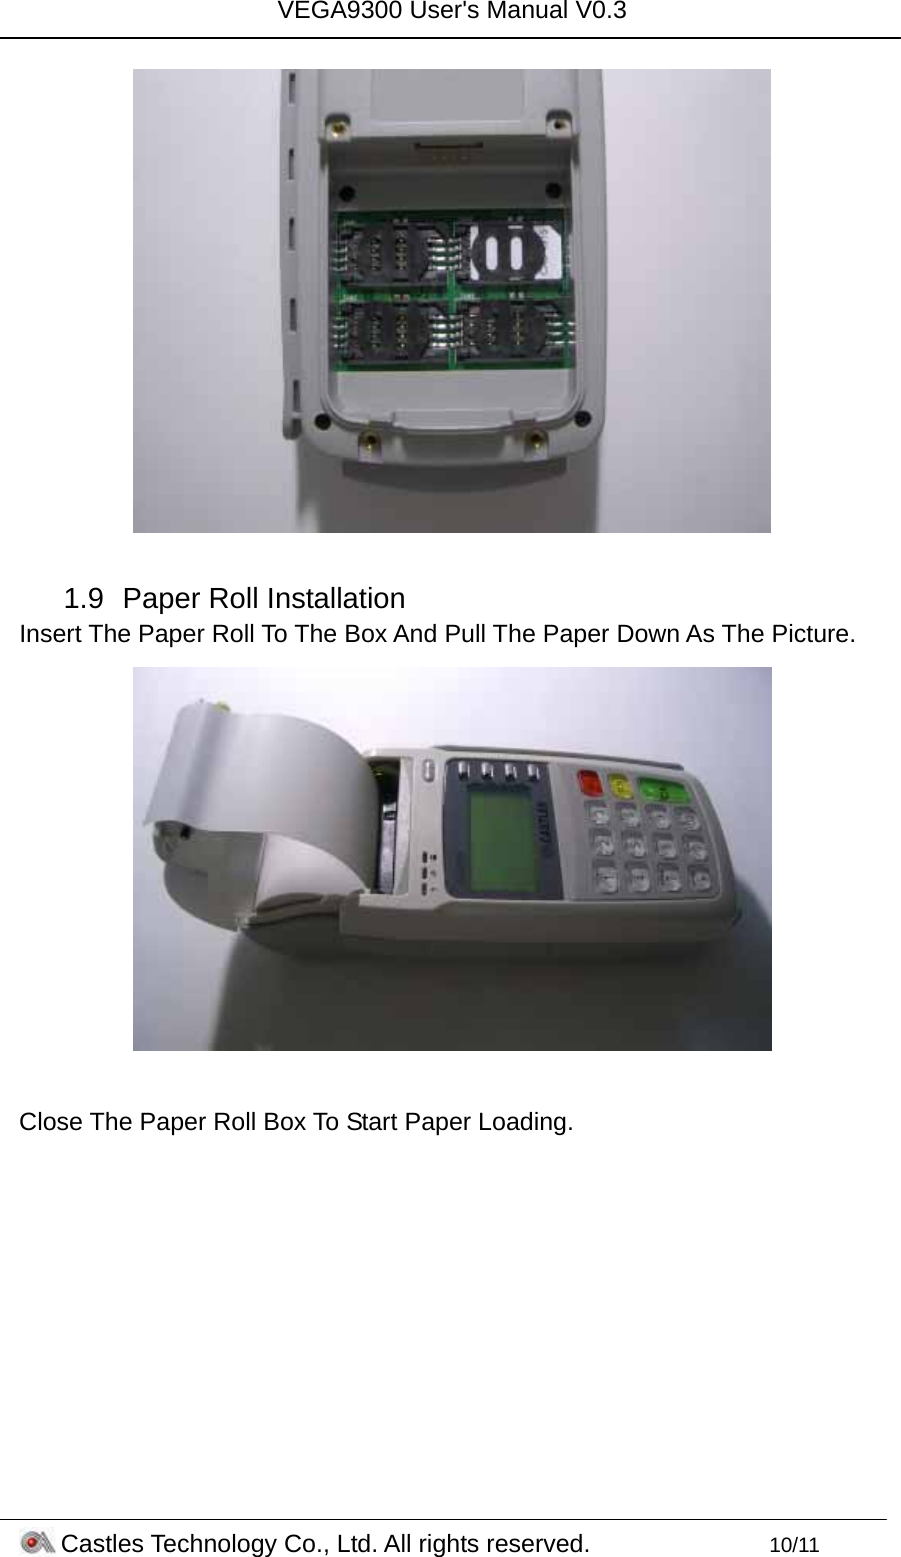 VEGA9300 User&apos;s Manual V0.3 Castles Technology Co., Ltd. All rights reserved.        10/11   1.9  Paper Roll Installation Insert The Paper Roll To The Box And Pull The Paper Down As The Picture.   Close The Paper Roll Box To Start Paper Loading. 